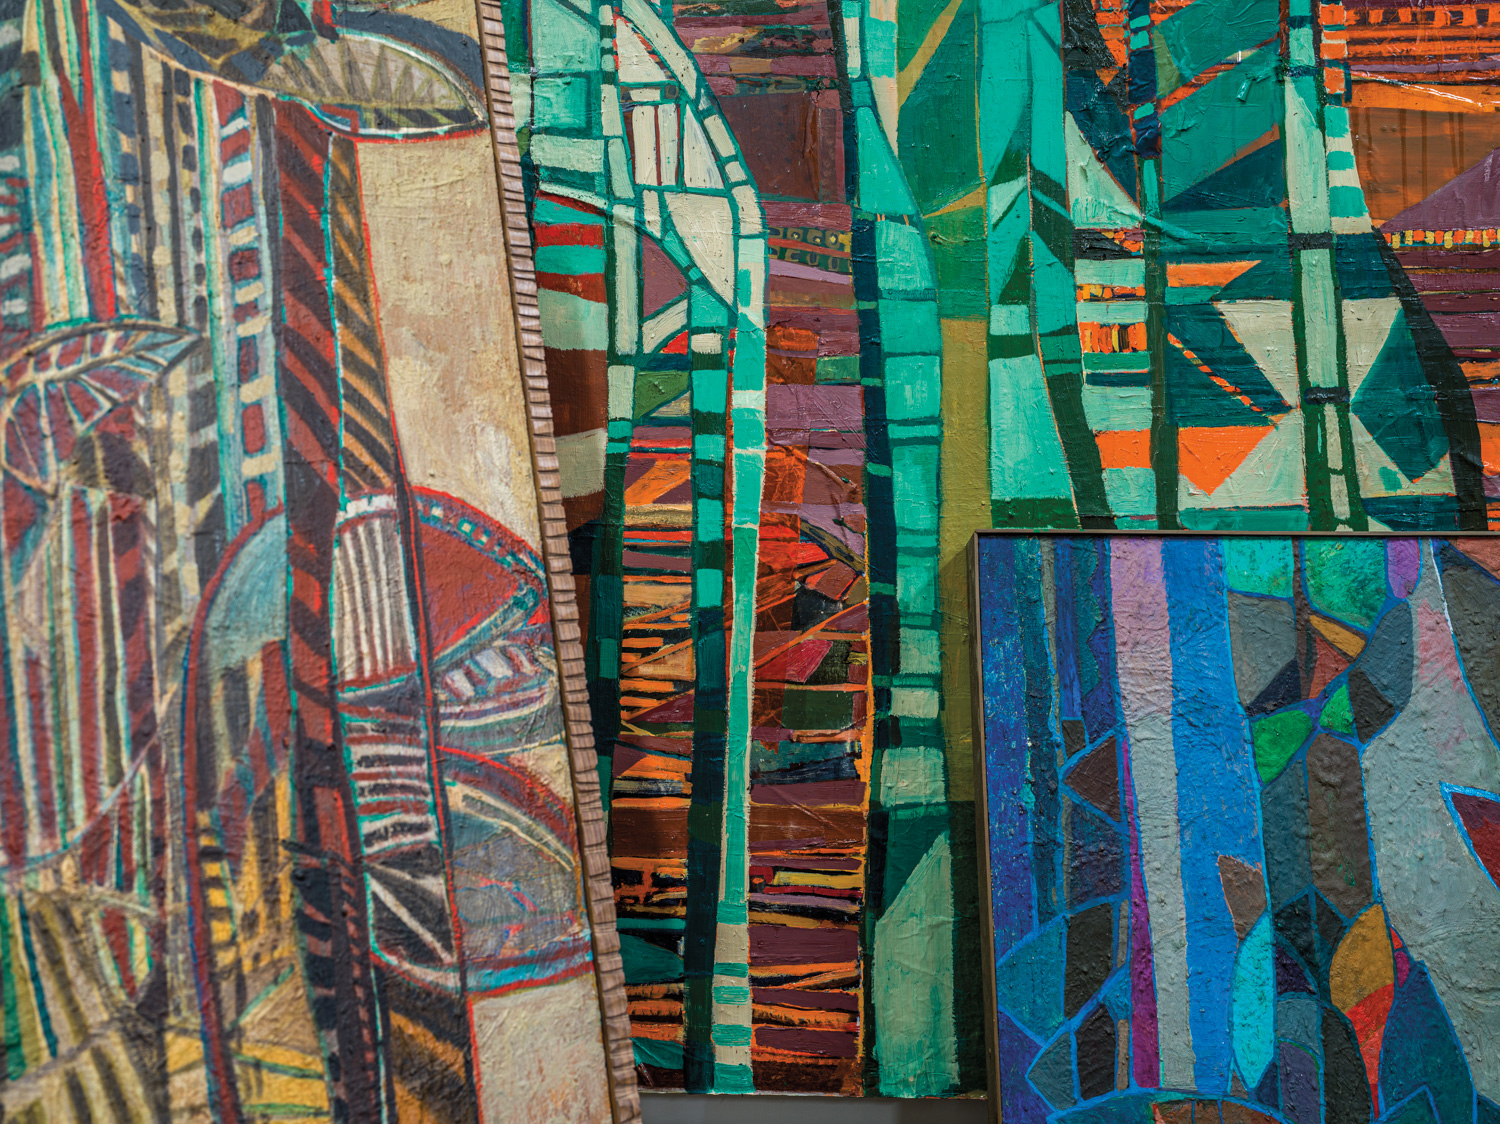 Details of encaustic multimedia artwork showing layers of color and pattern